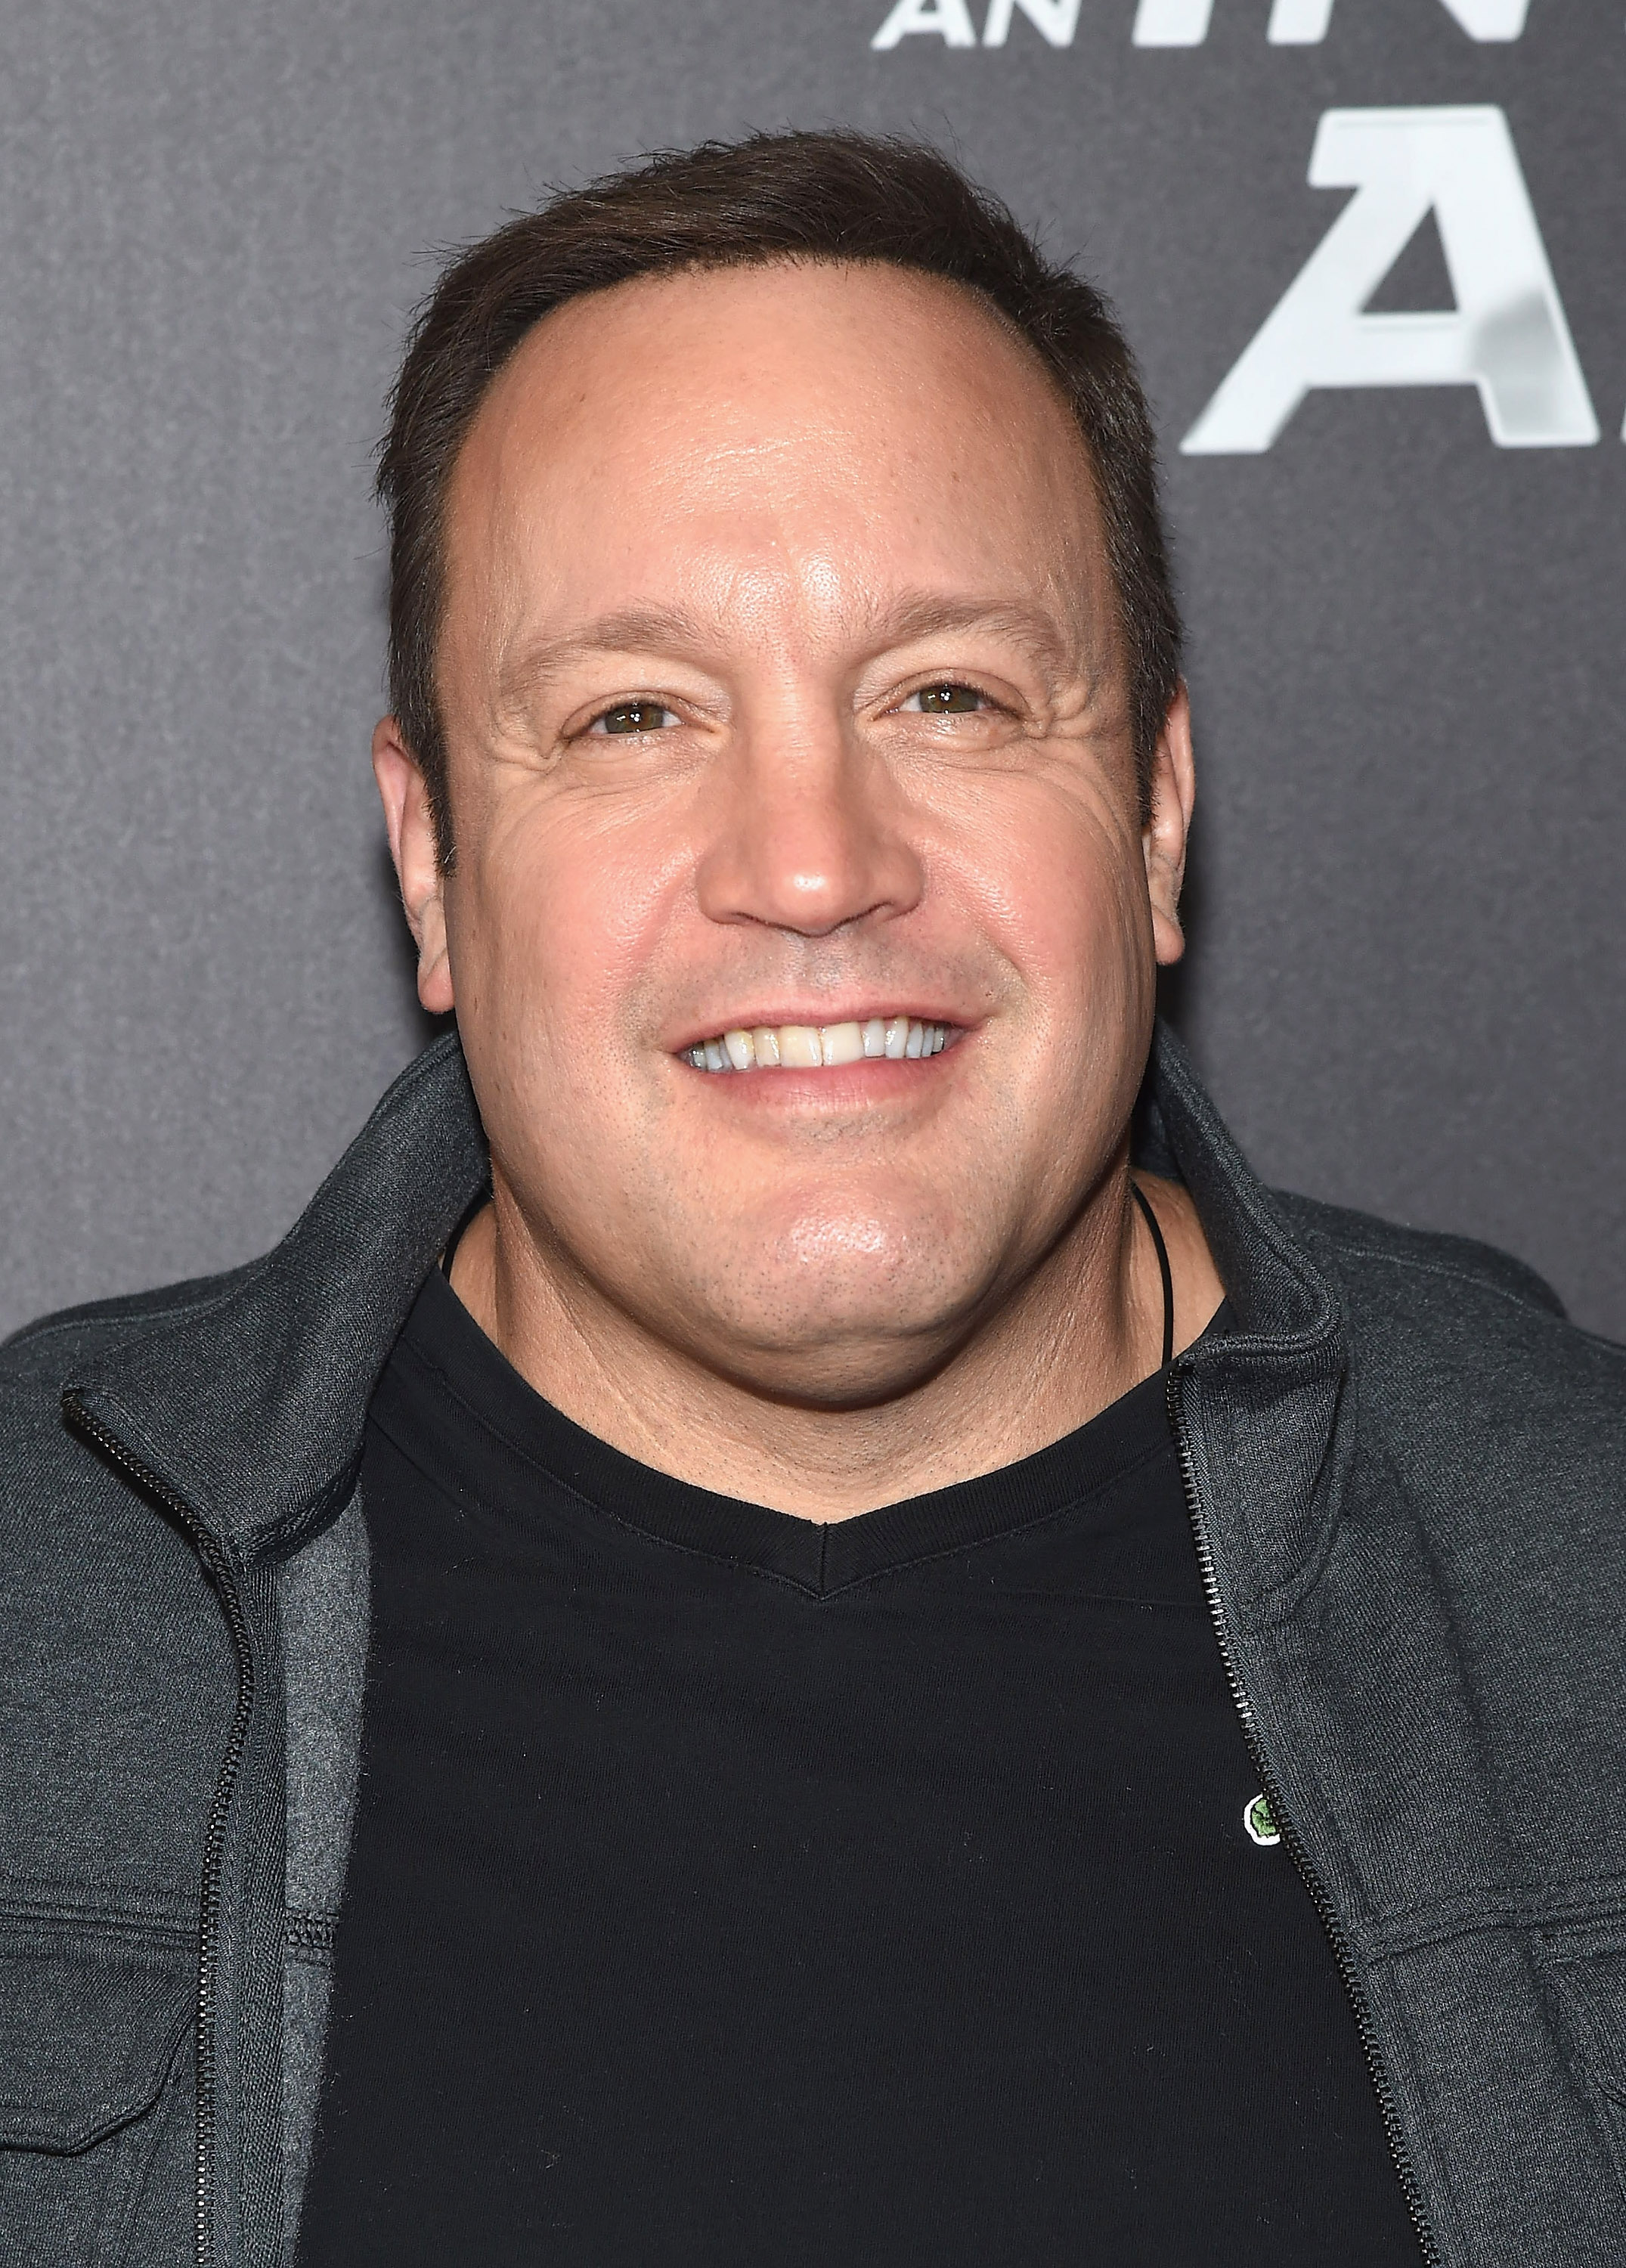 Kevin James at the "True Memoirs Of An International Assassin" New York premiere on November 3, 2016, in New York City. | Source: Getty Images